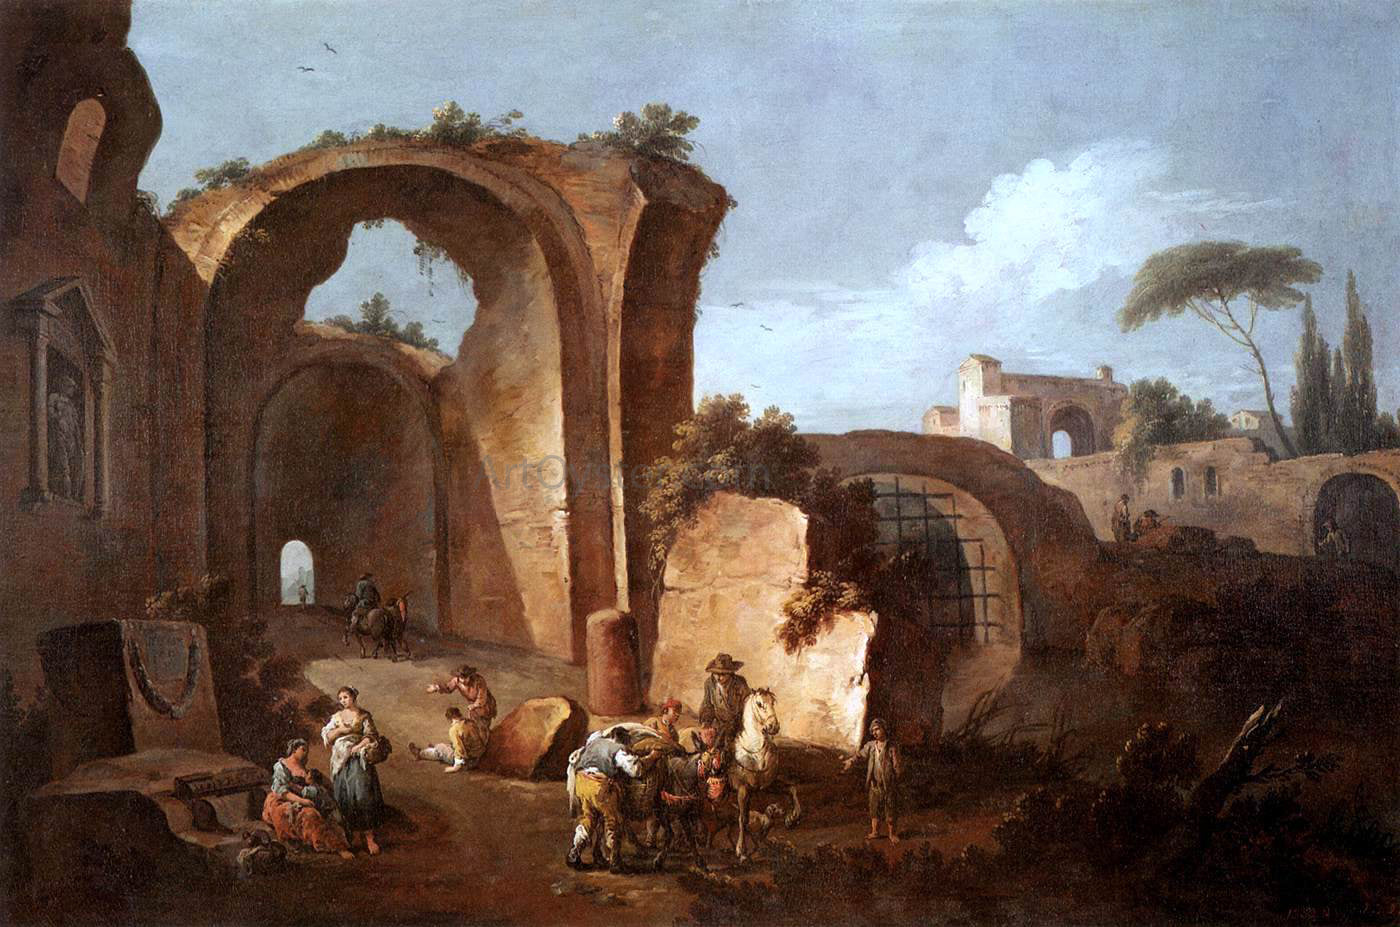  Giuseppe Zais Landscape with Ruins and Archway - Hand Painted Oil Painting